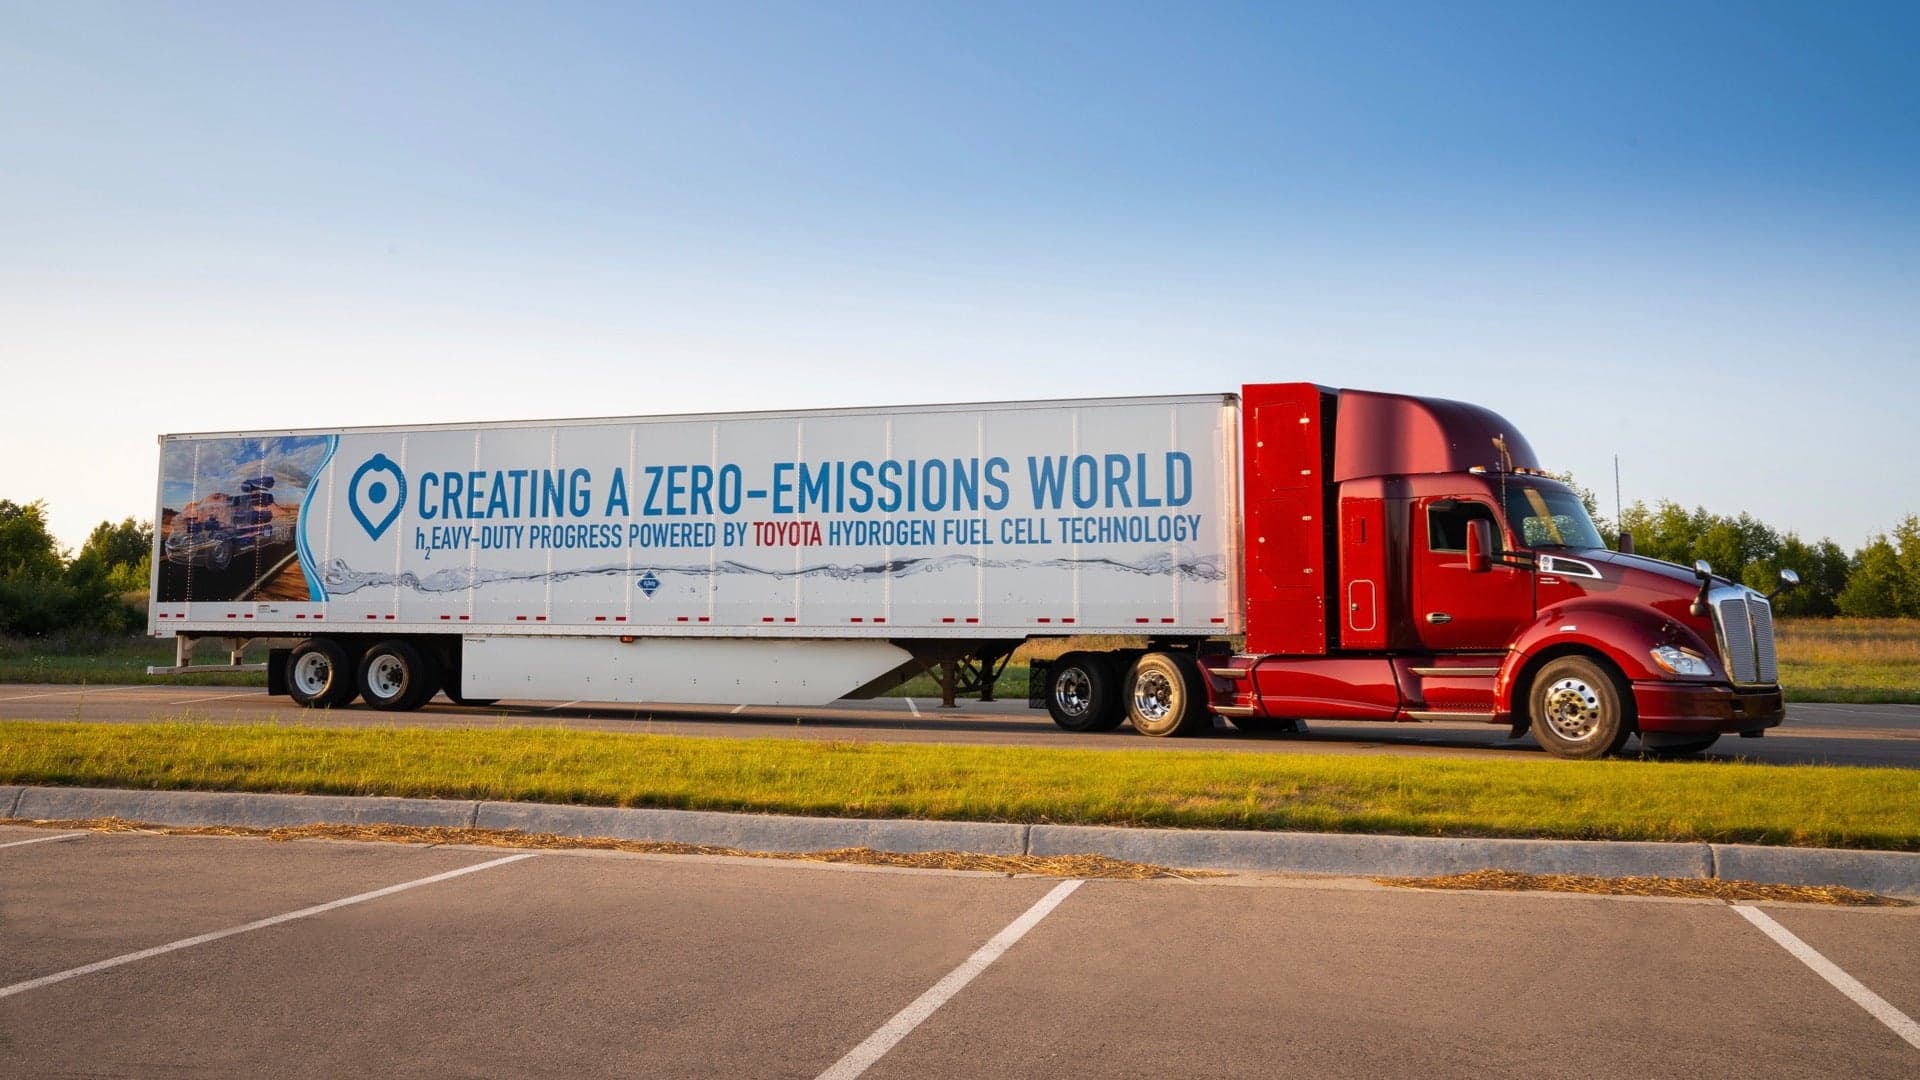 Toyota Announces Partnership With Kenworth for Hydrogen Fuel Cell Development